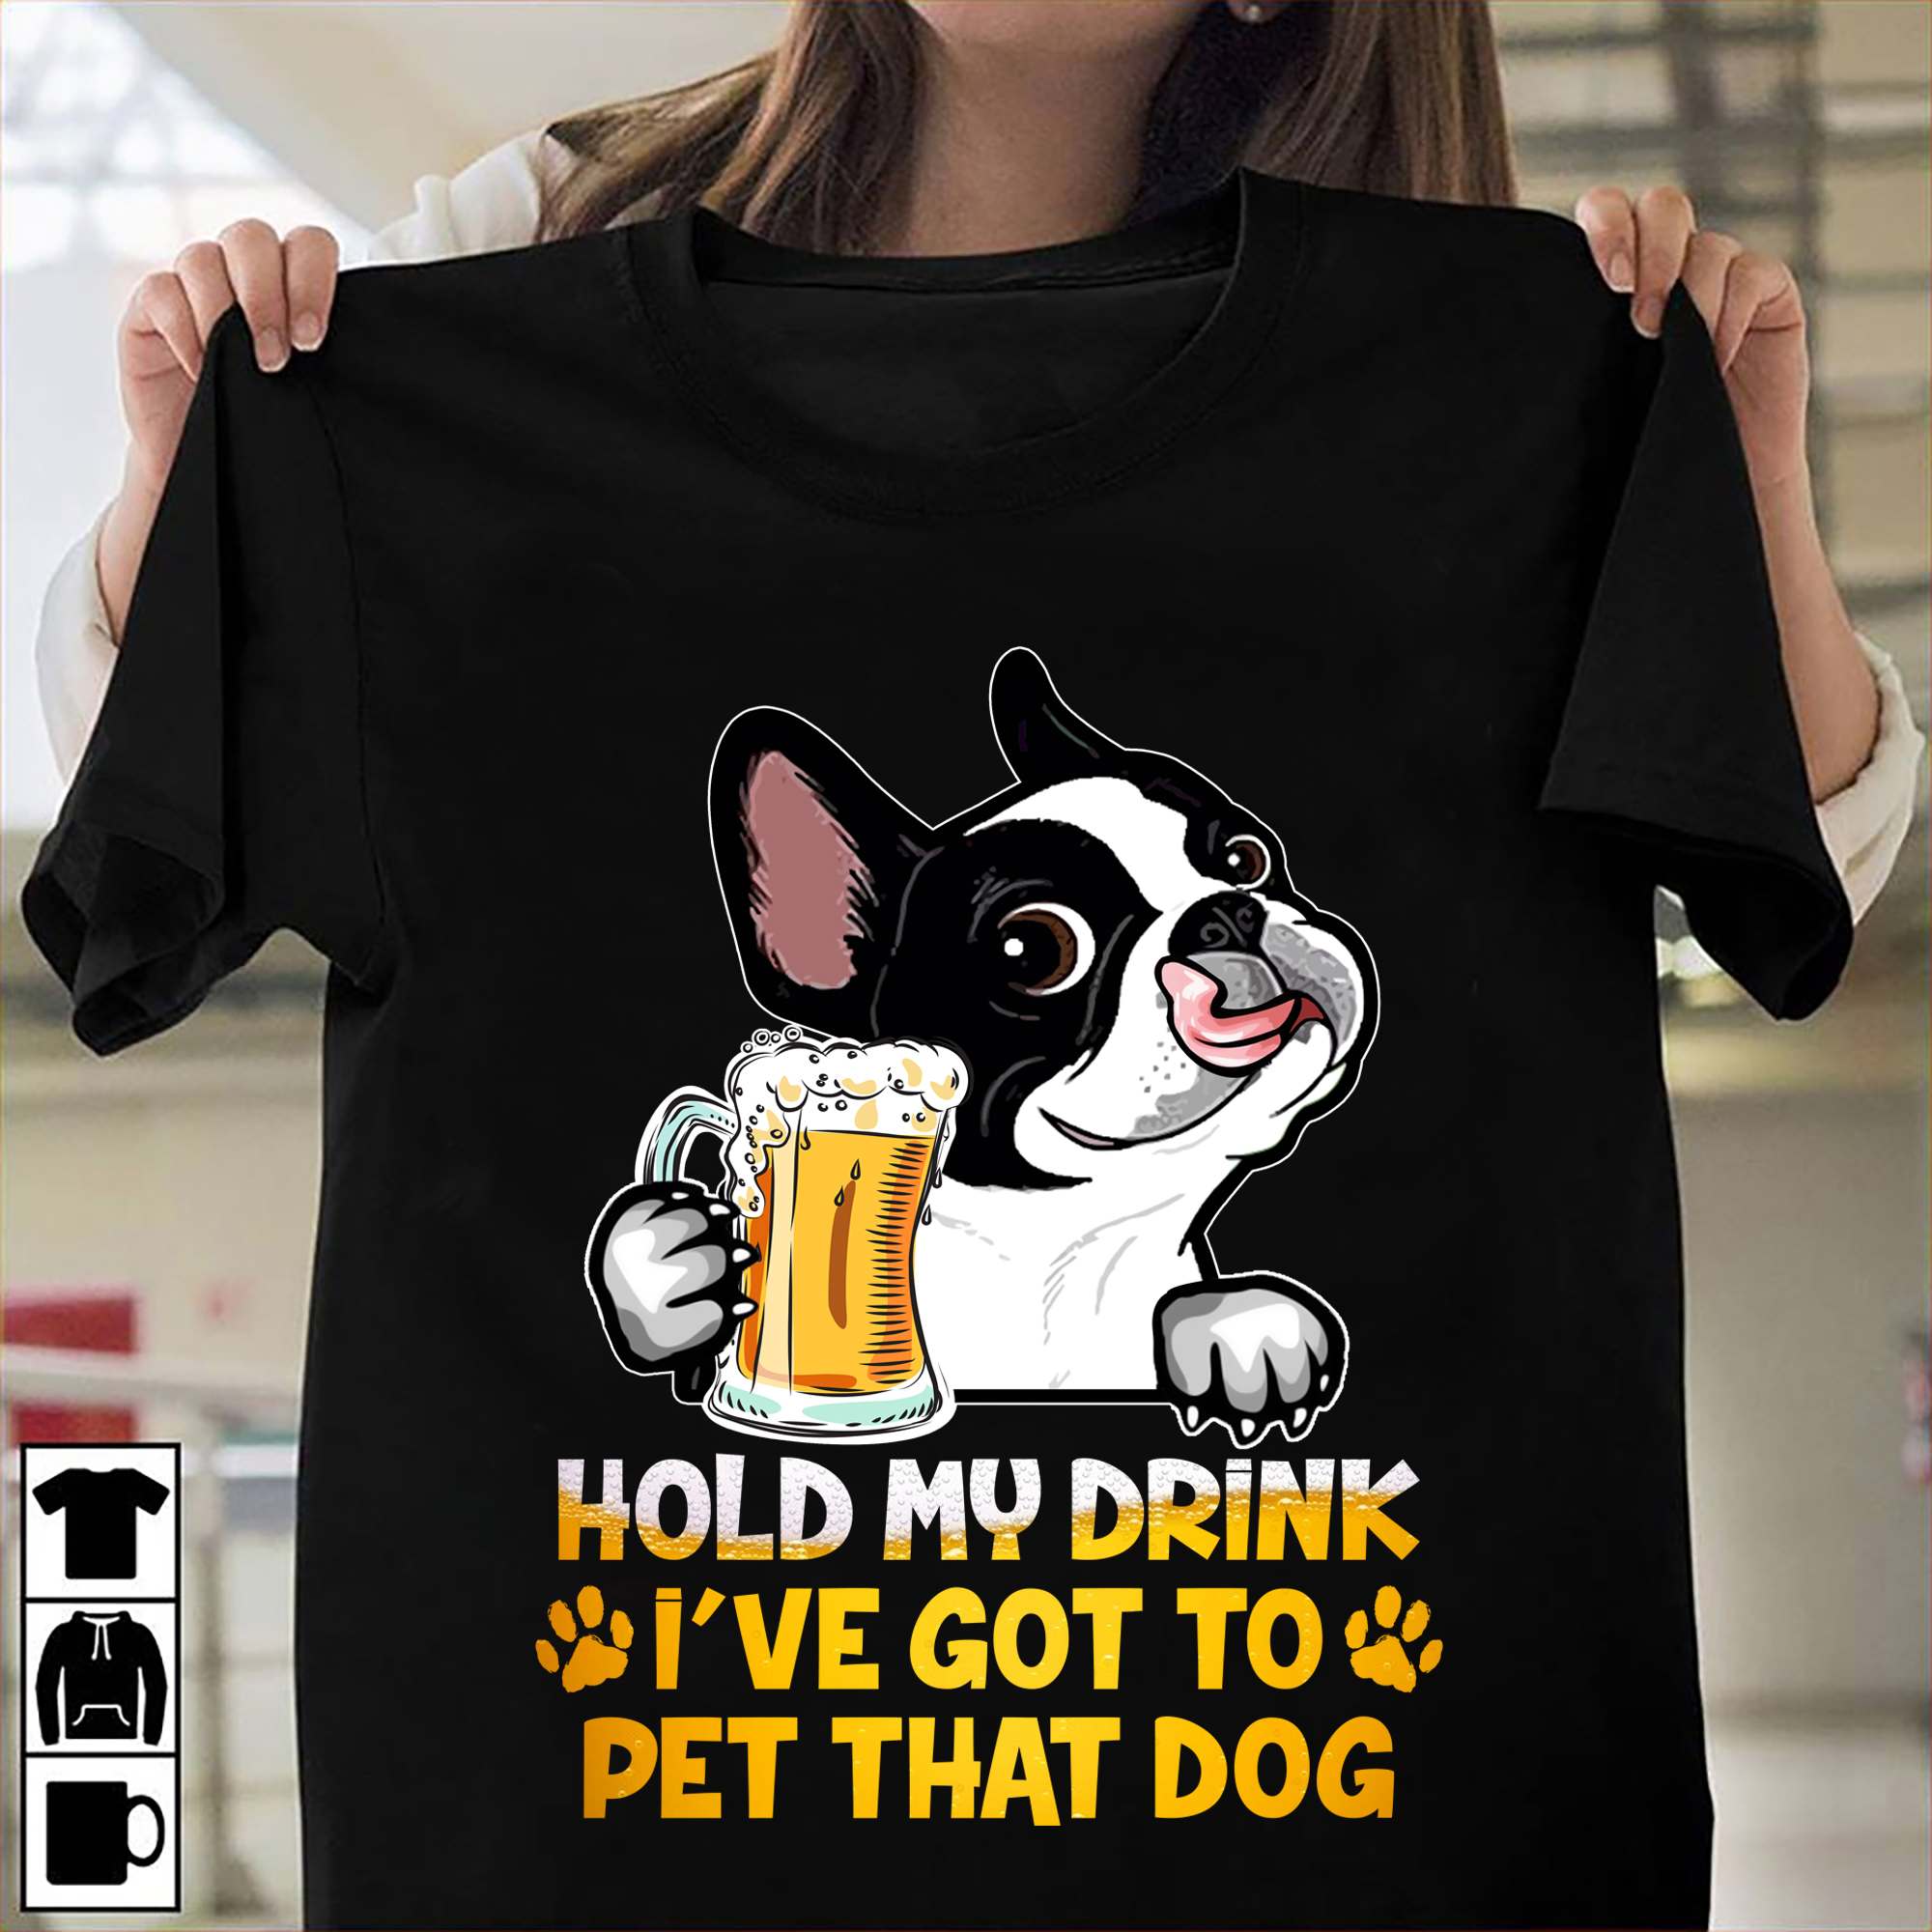 Hold my drink I've got to pet that dog - Frenchie dog and beer